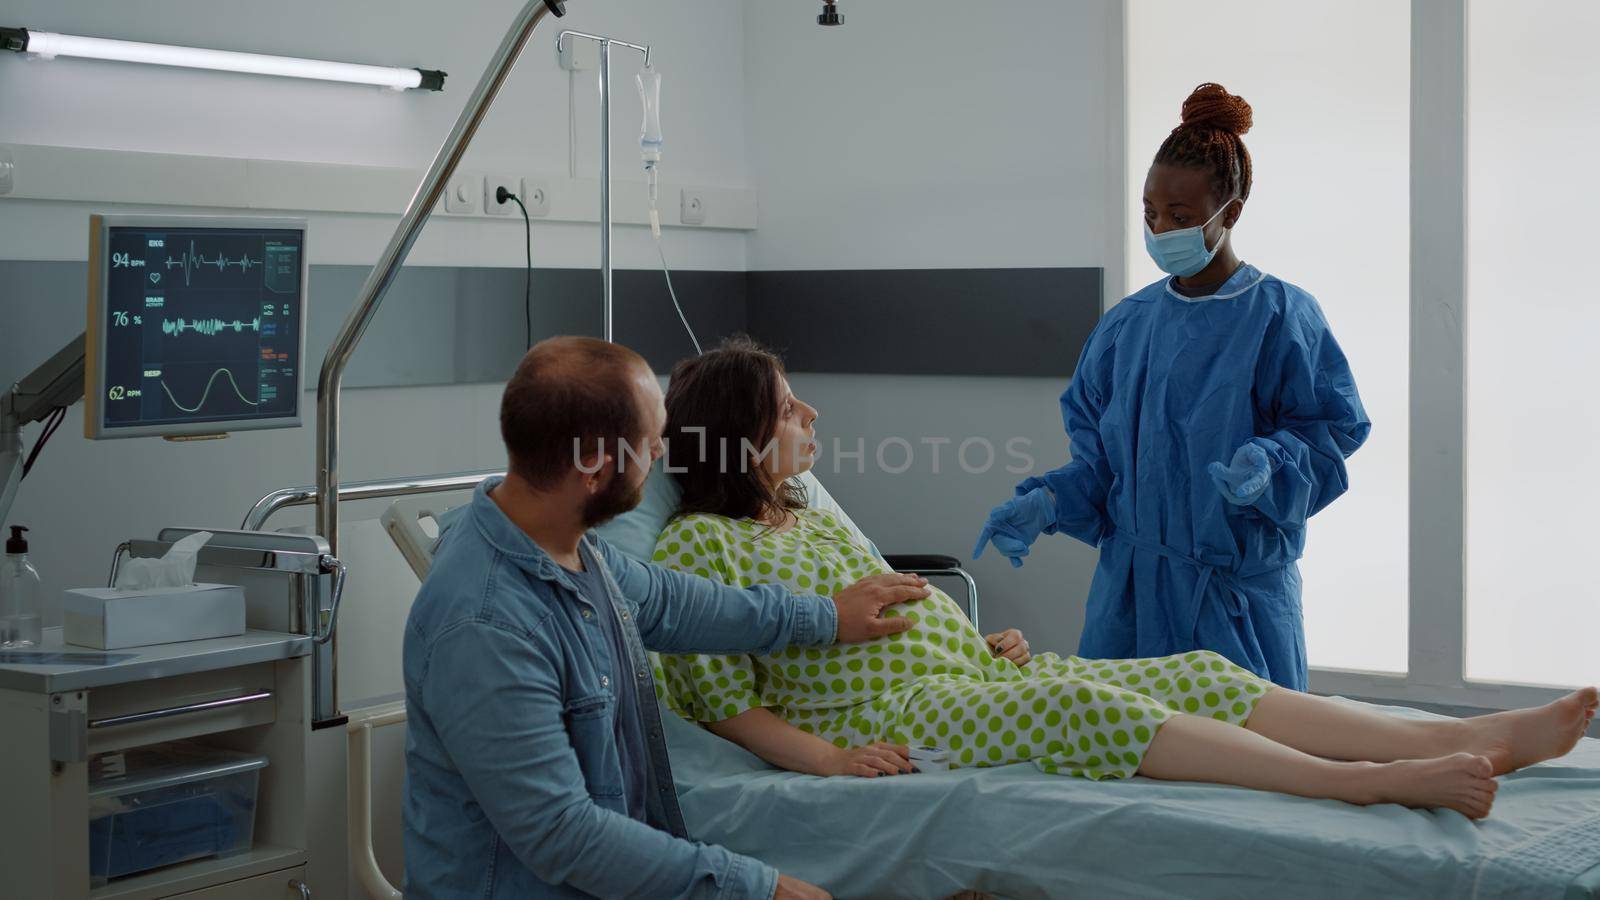 Caucasian couple expecting baby in maternity ward by DCStudio